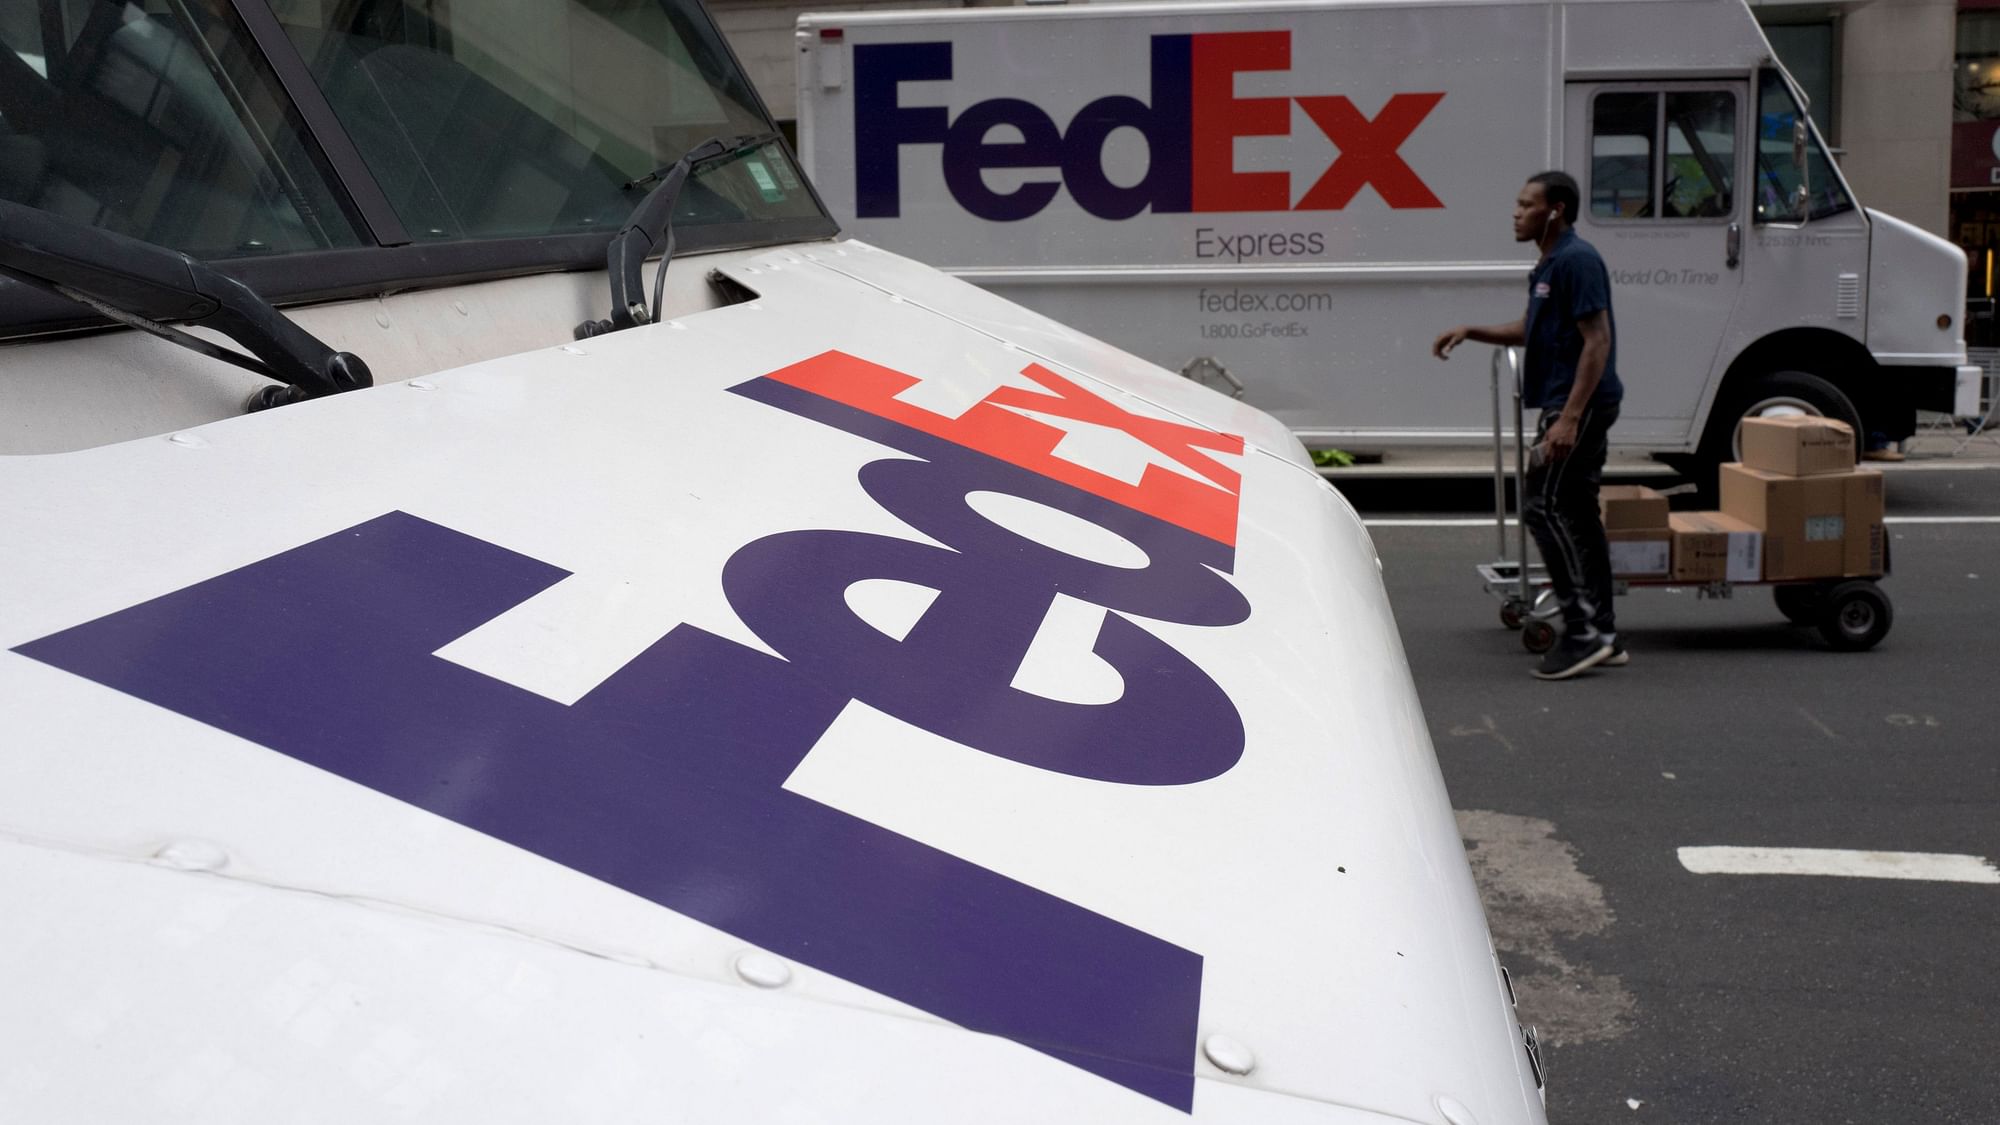 FedEx is dropping a contract for air shipment of packages for Amazon within the United States, reducing its ties with the online retail giant that is already expanding its own delivery business.&nbsp;